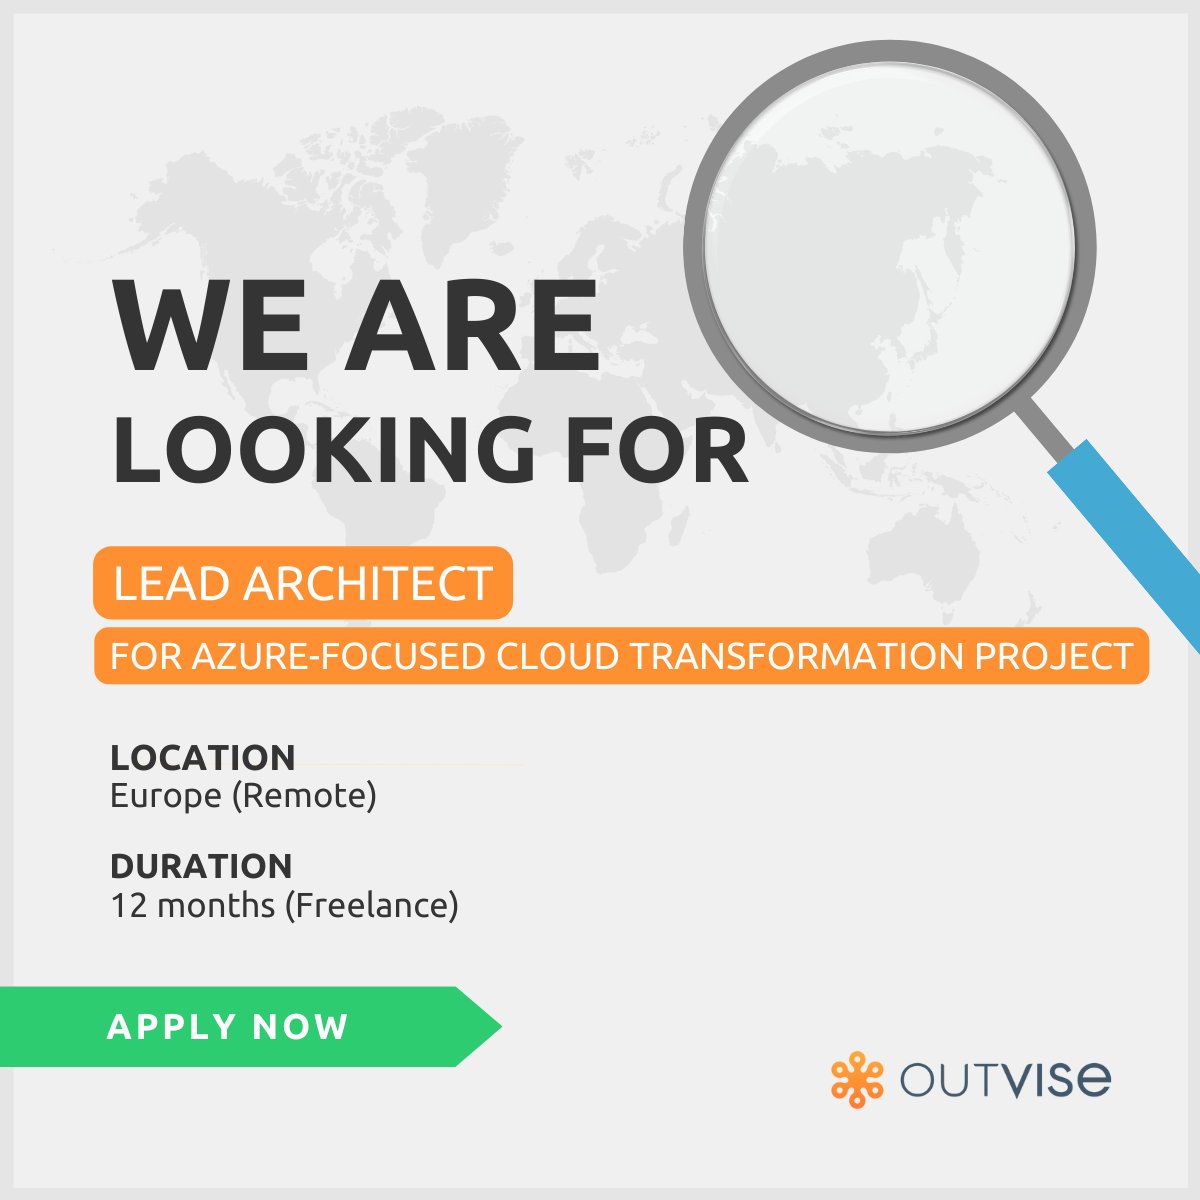 Our client is seeking a Lead Architect for Azure-focused Cloud Transformation Project. 🔎

Apply here 👉 outvise.com/sl/Ssz5ypRbe0

#OutviseProjects #Freelance #Hiringnow #Europe